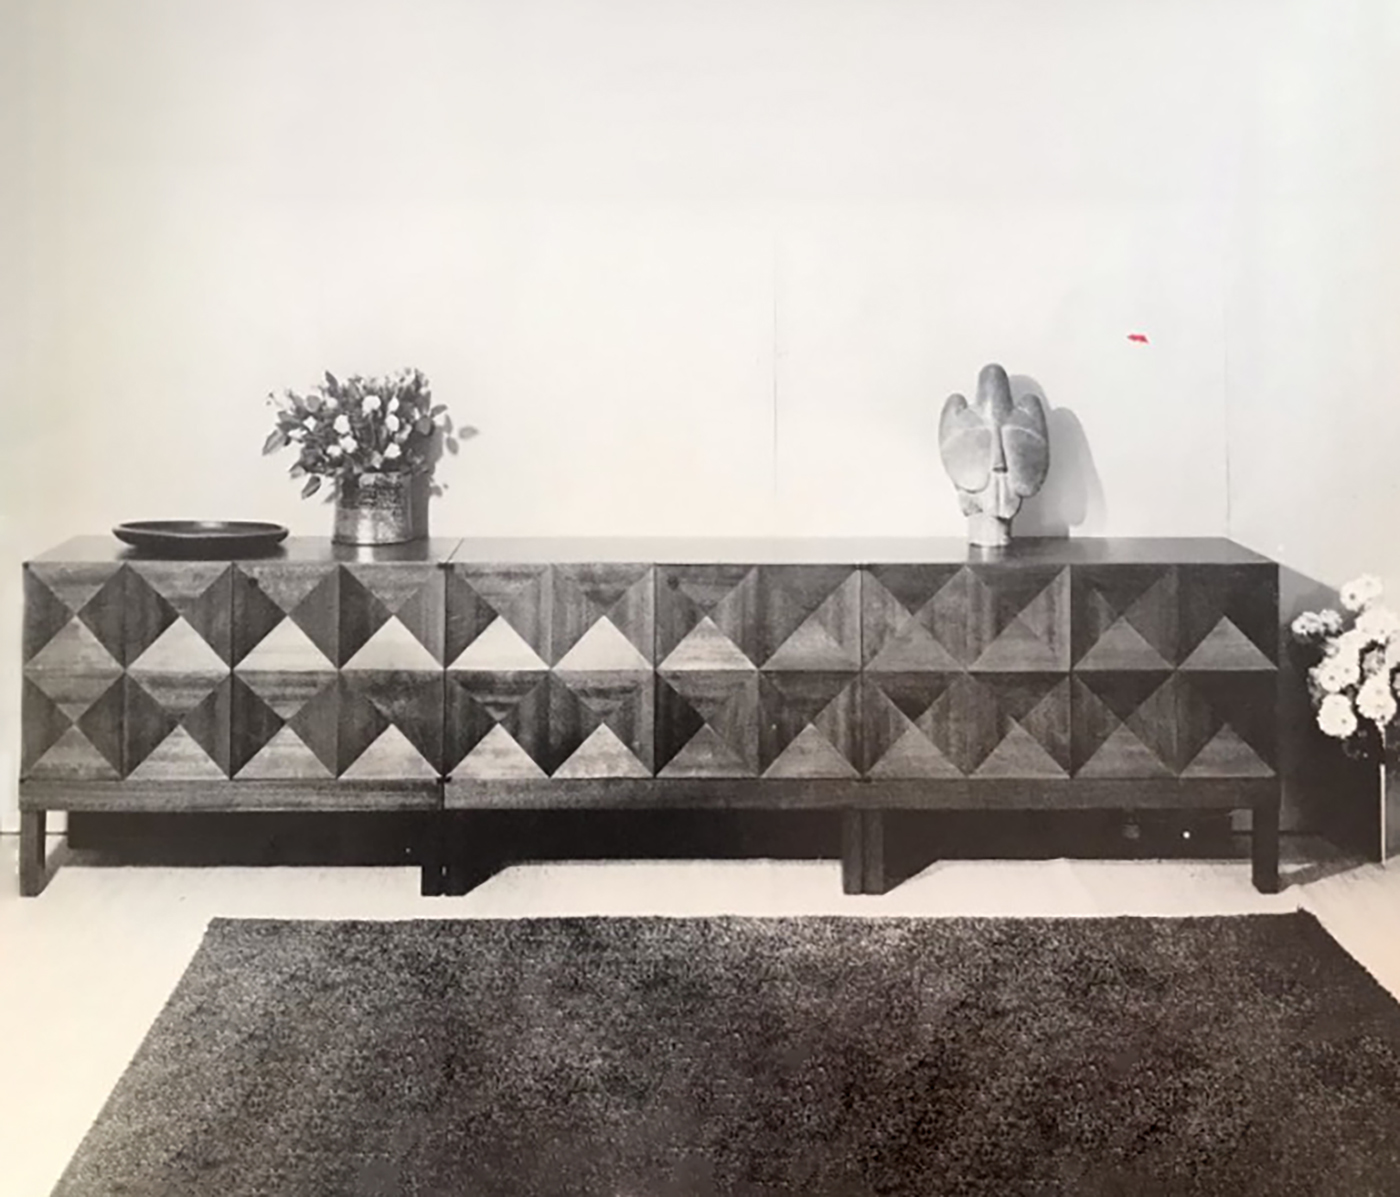 quality crafted cabinet with op-art doors designed by J. Batenburg for MI, Belgium 1969.image 10